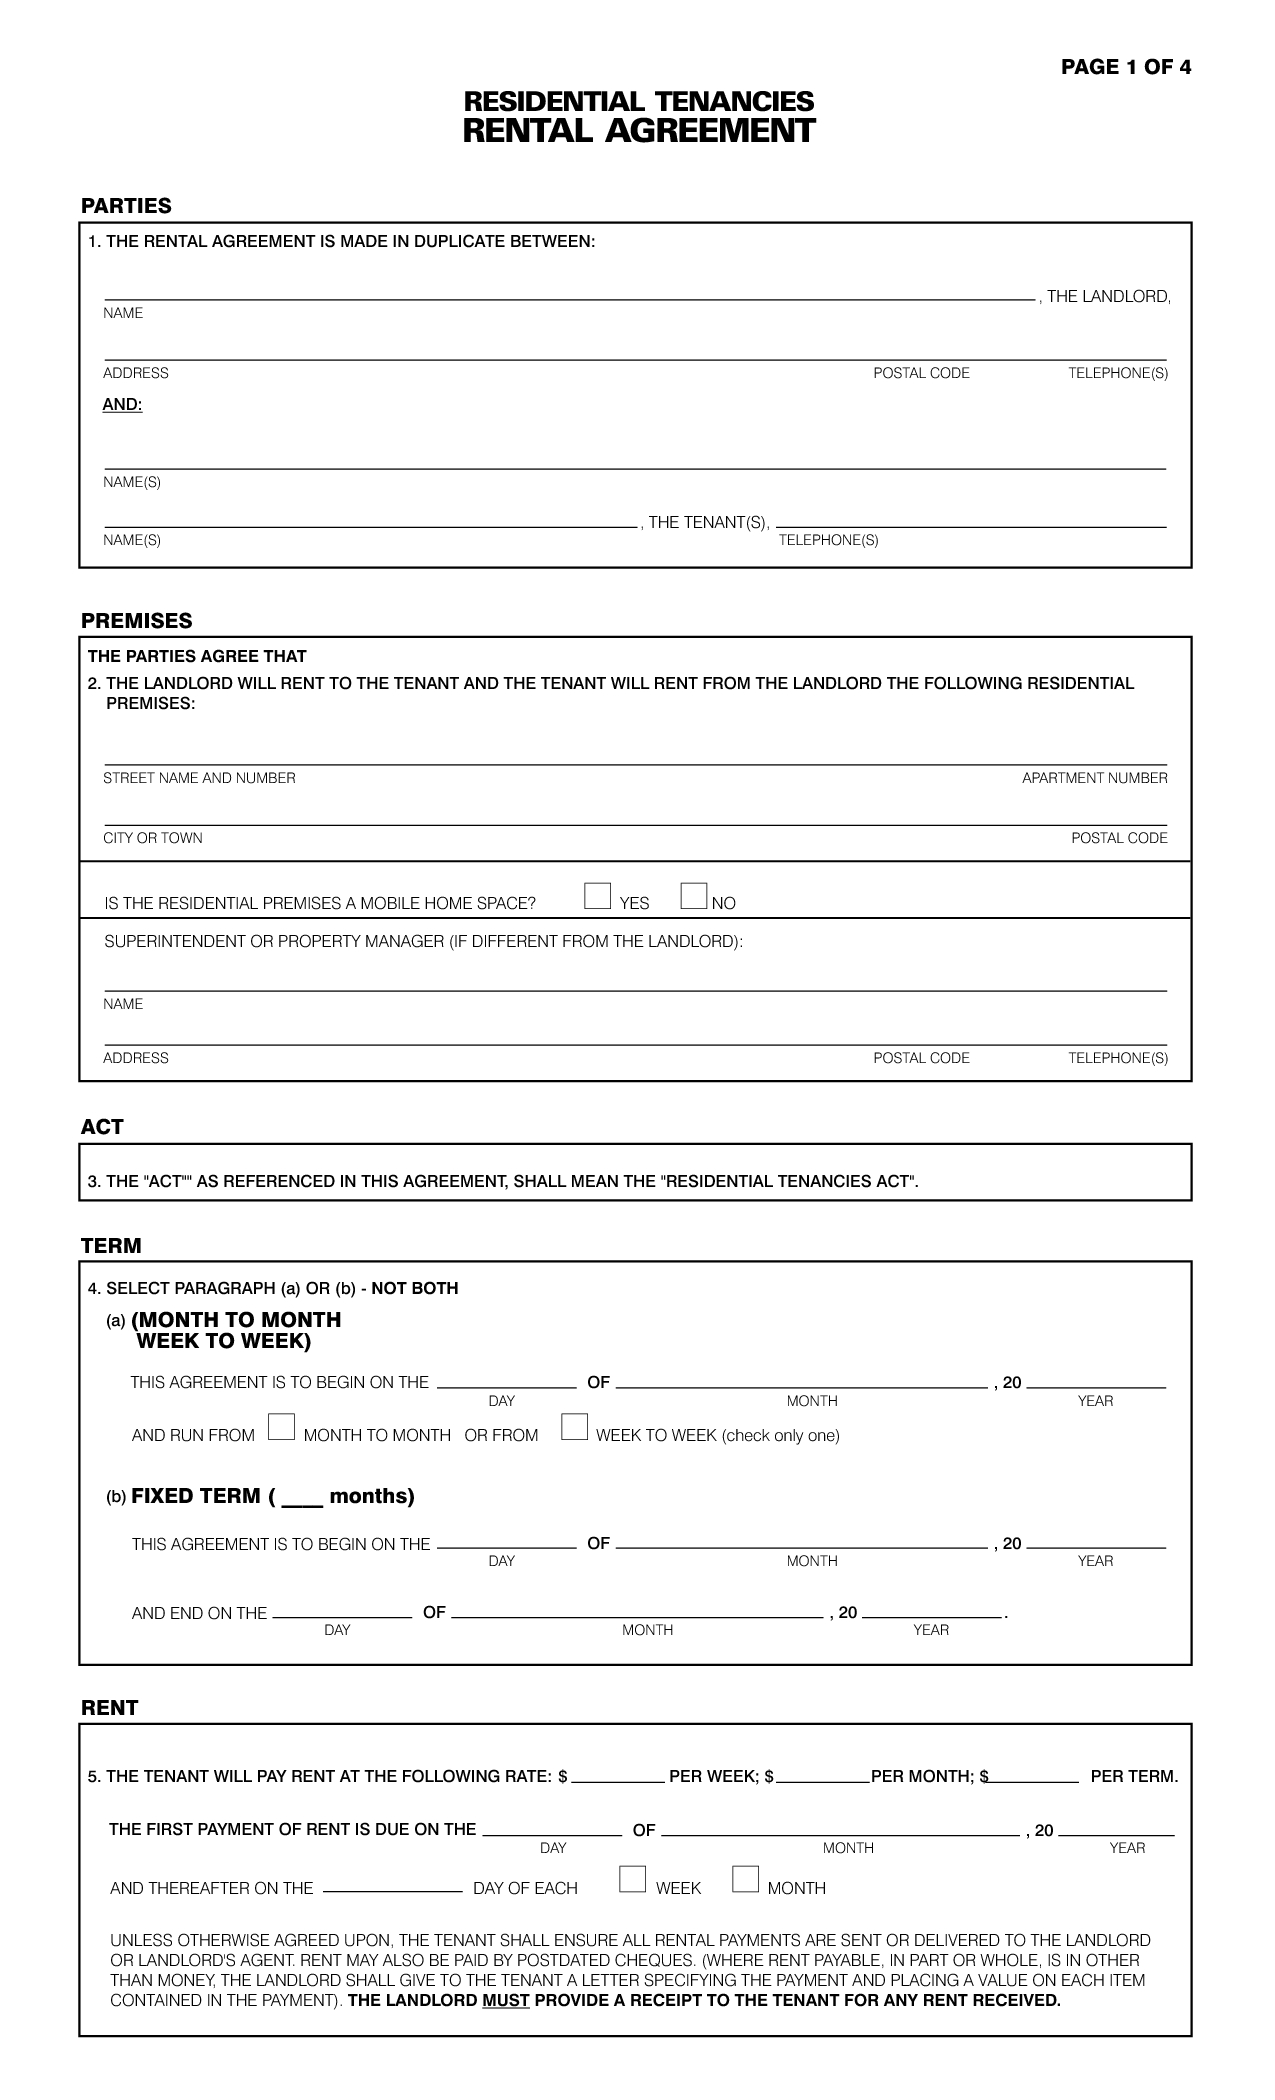 House Lease Agreement Ny Residential Lease Agreement Template Free Download Blank Rental